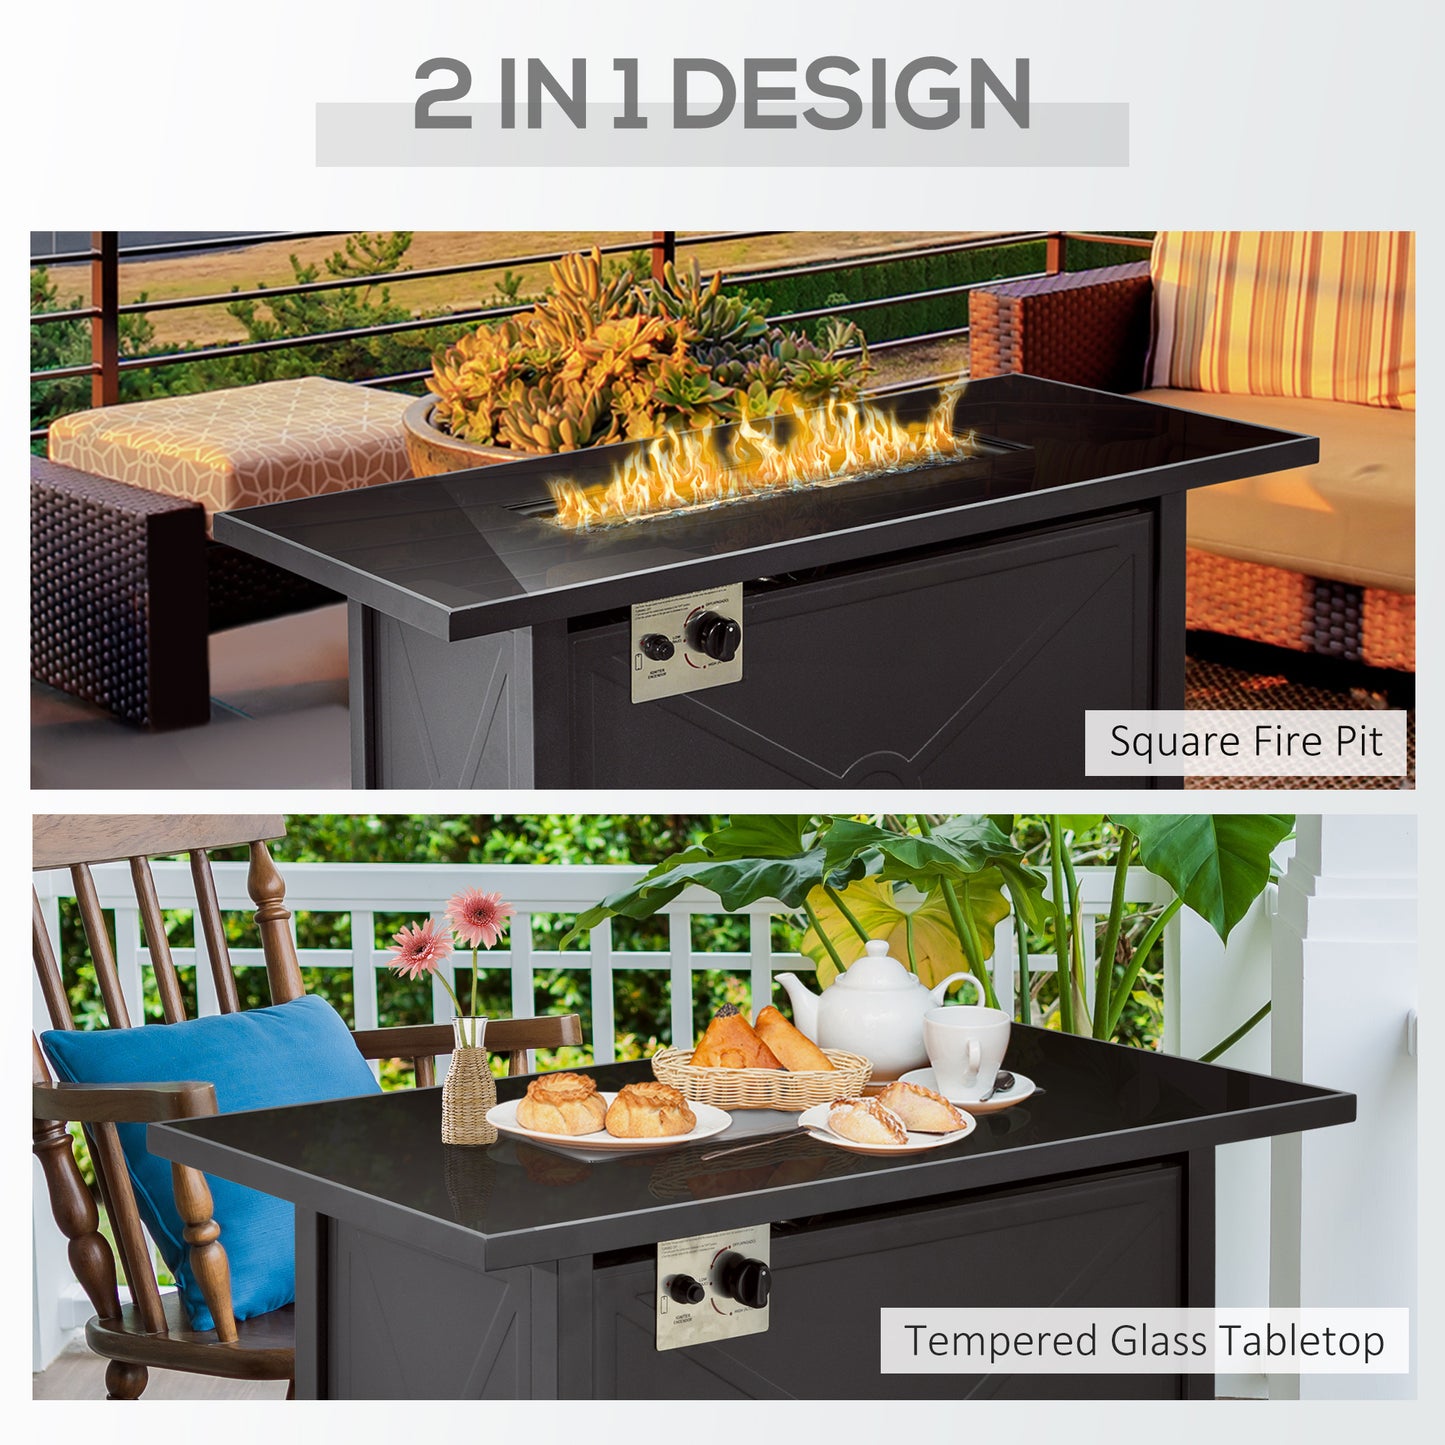 Outsunny Propane Gas Fire Pit Table, 50000BTU Smokeless Firepit Outdoor Patio Heater with Tempered Glass Tabletop, Cover, 109cm x 56cm x 64cm, Black